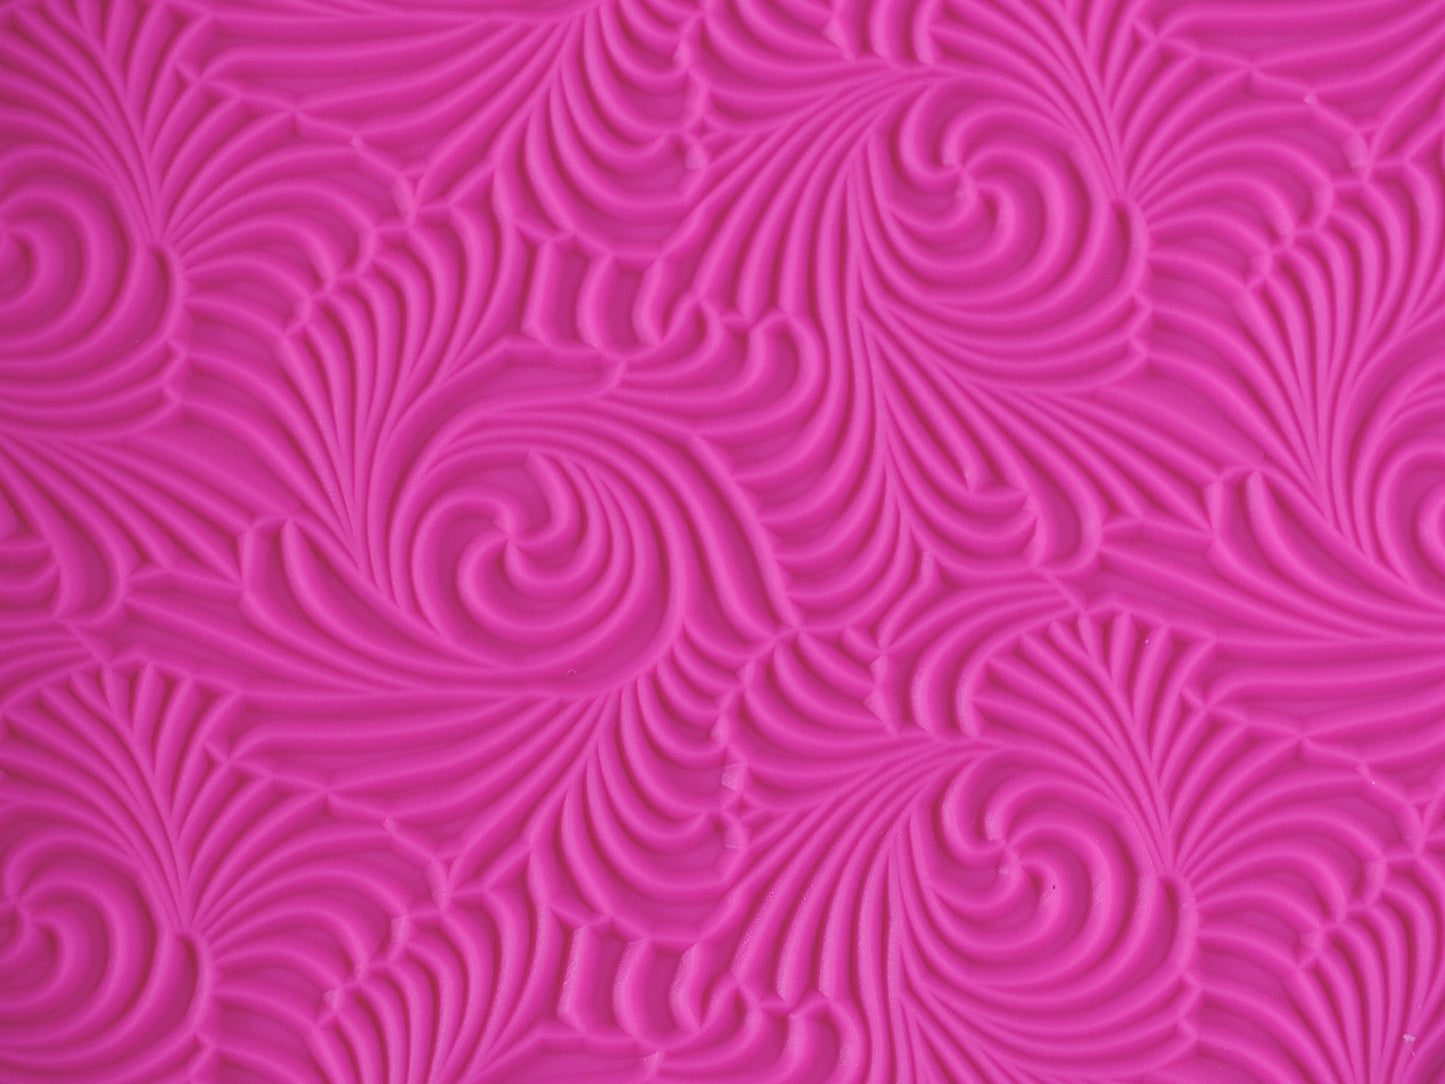 A close up view of the texture on the pink swirl mat.